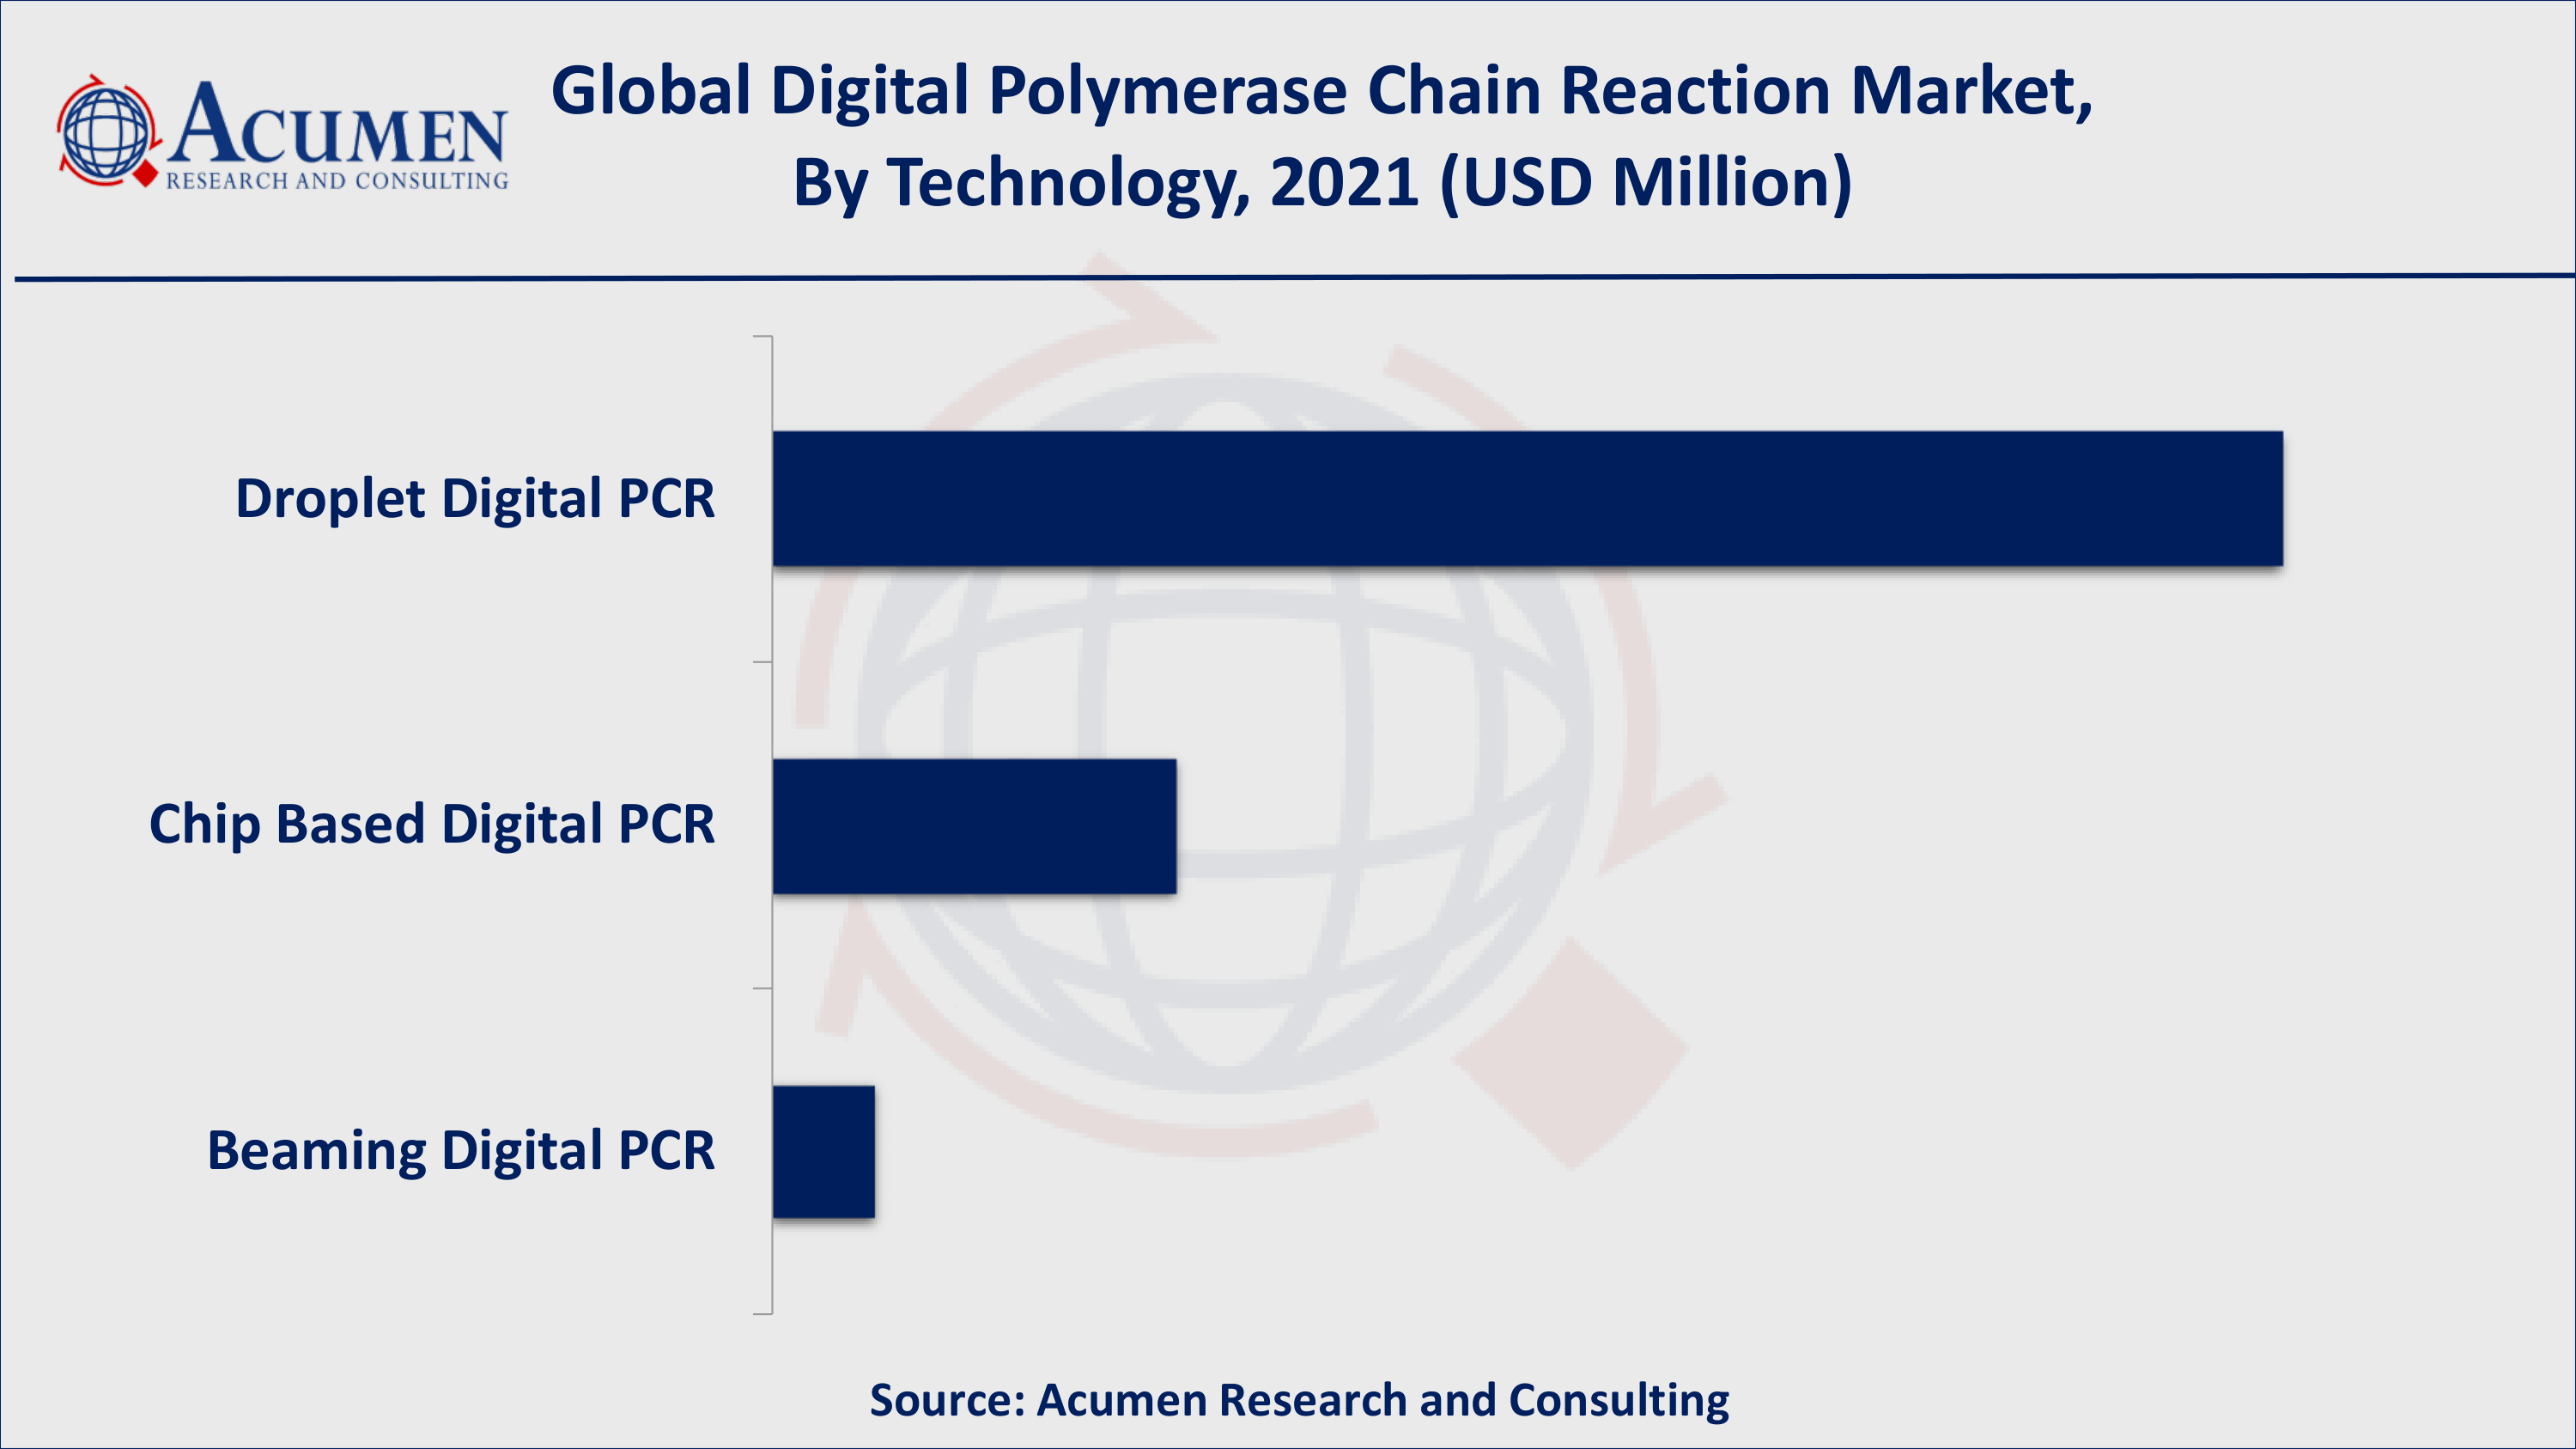 Based on technology, droplet digital PCR gathered over 75% of the overall market share in 2021